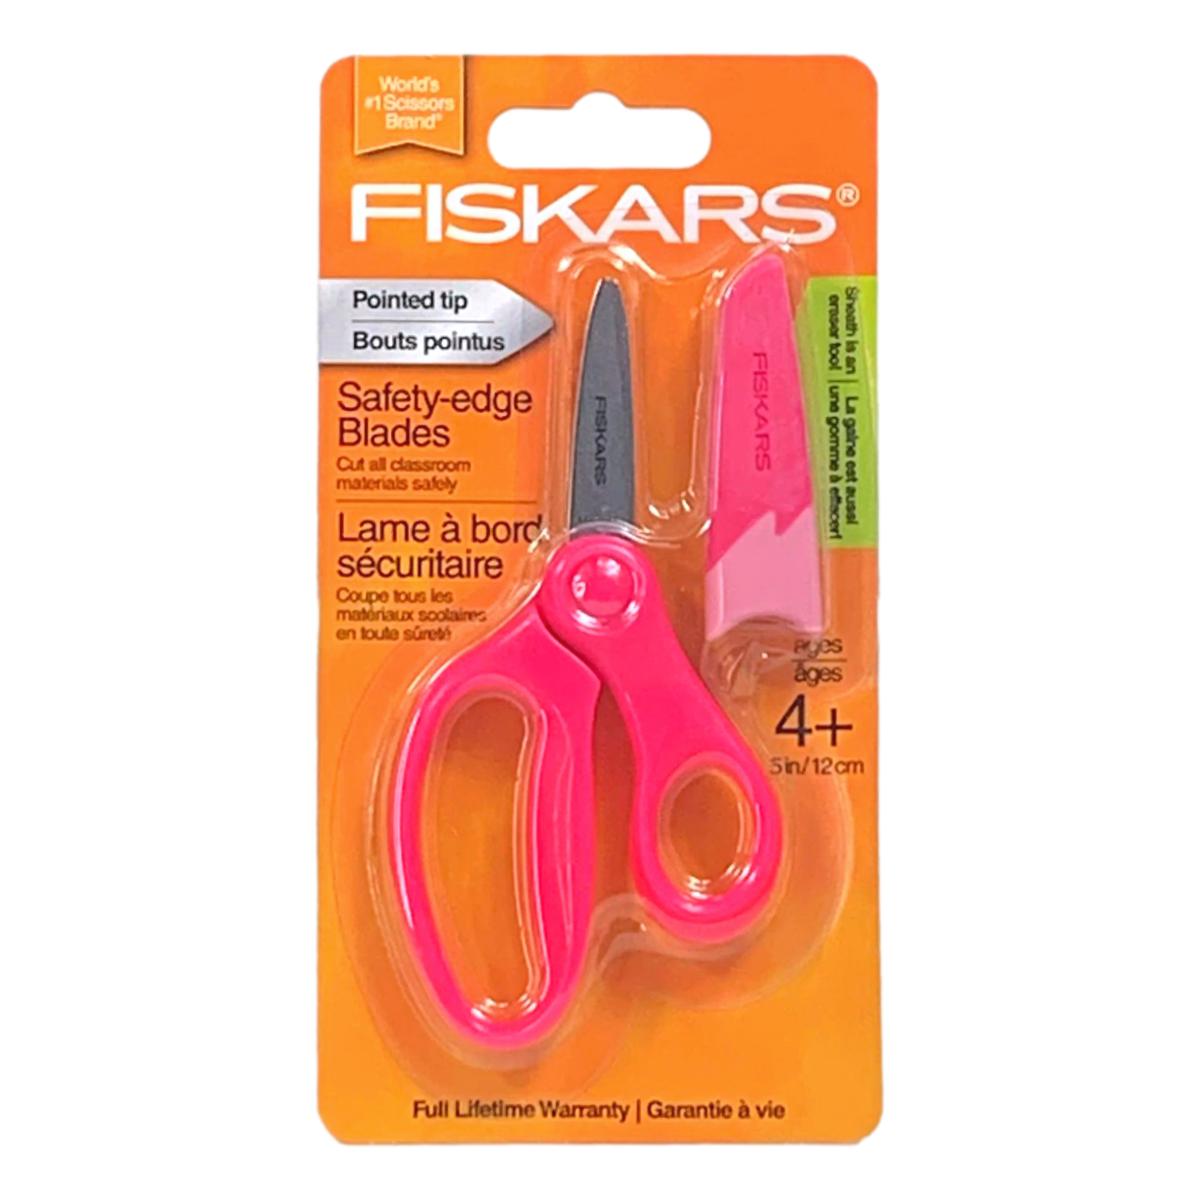 2) Fiskars Scissors for Kids 5 Inch Heavy Duty Safety Pointed Tip Pink